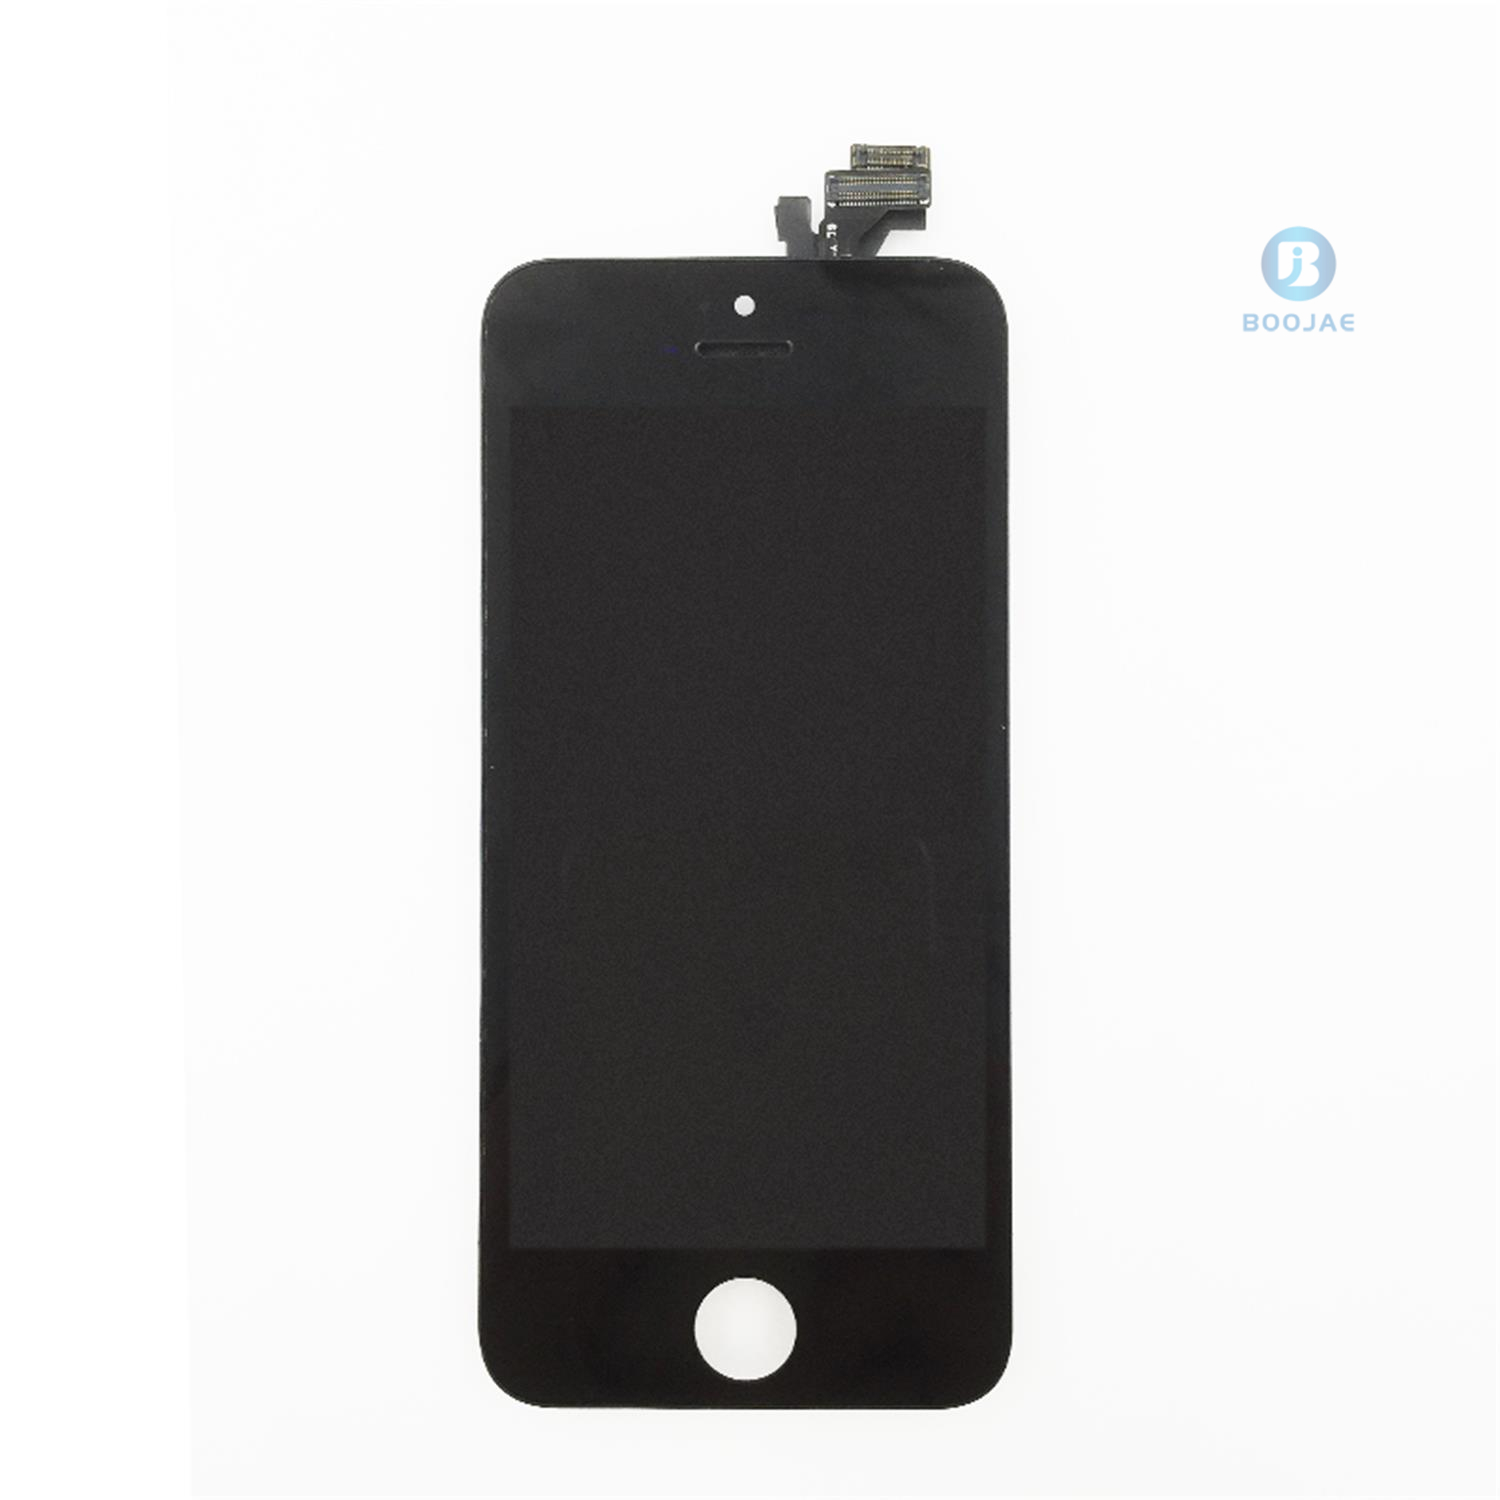 iPhone 5 Lcd Screen Display, Lcd Assembly Replacement